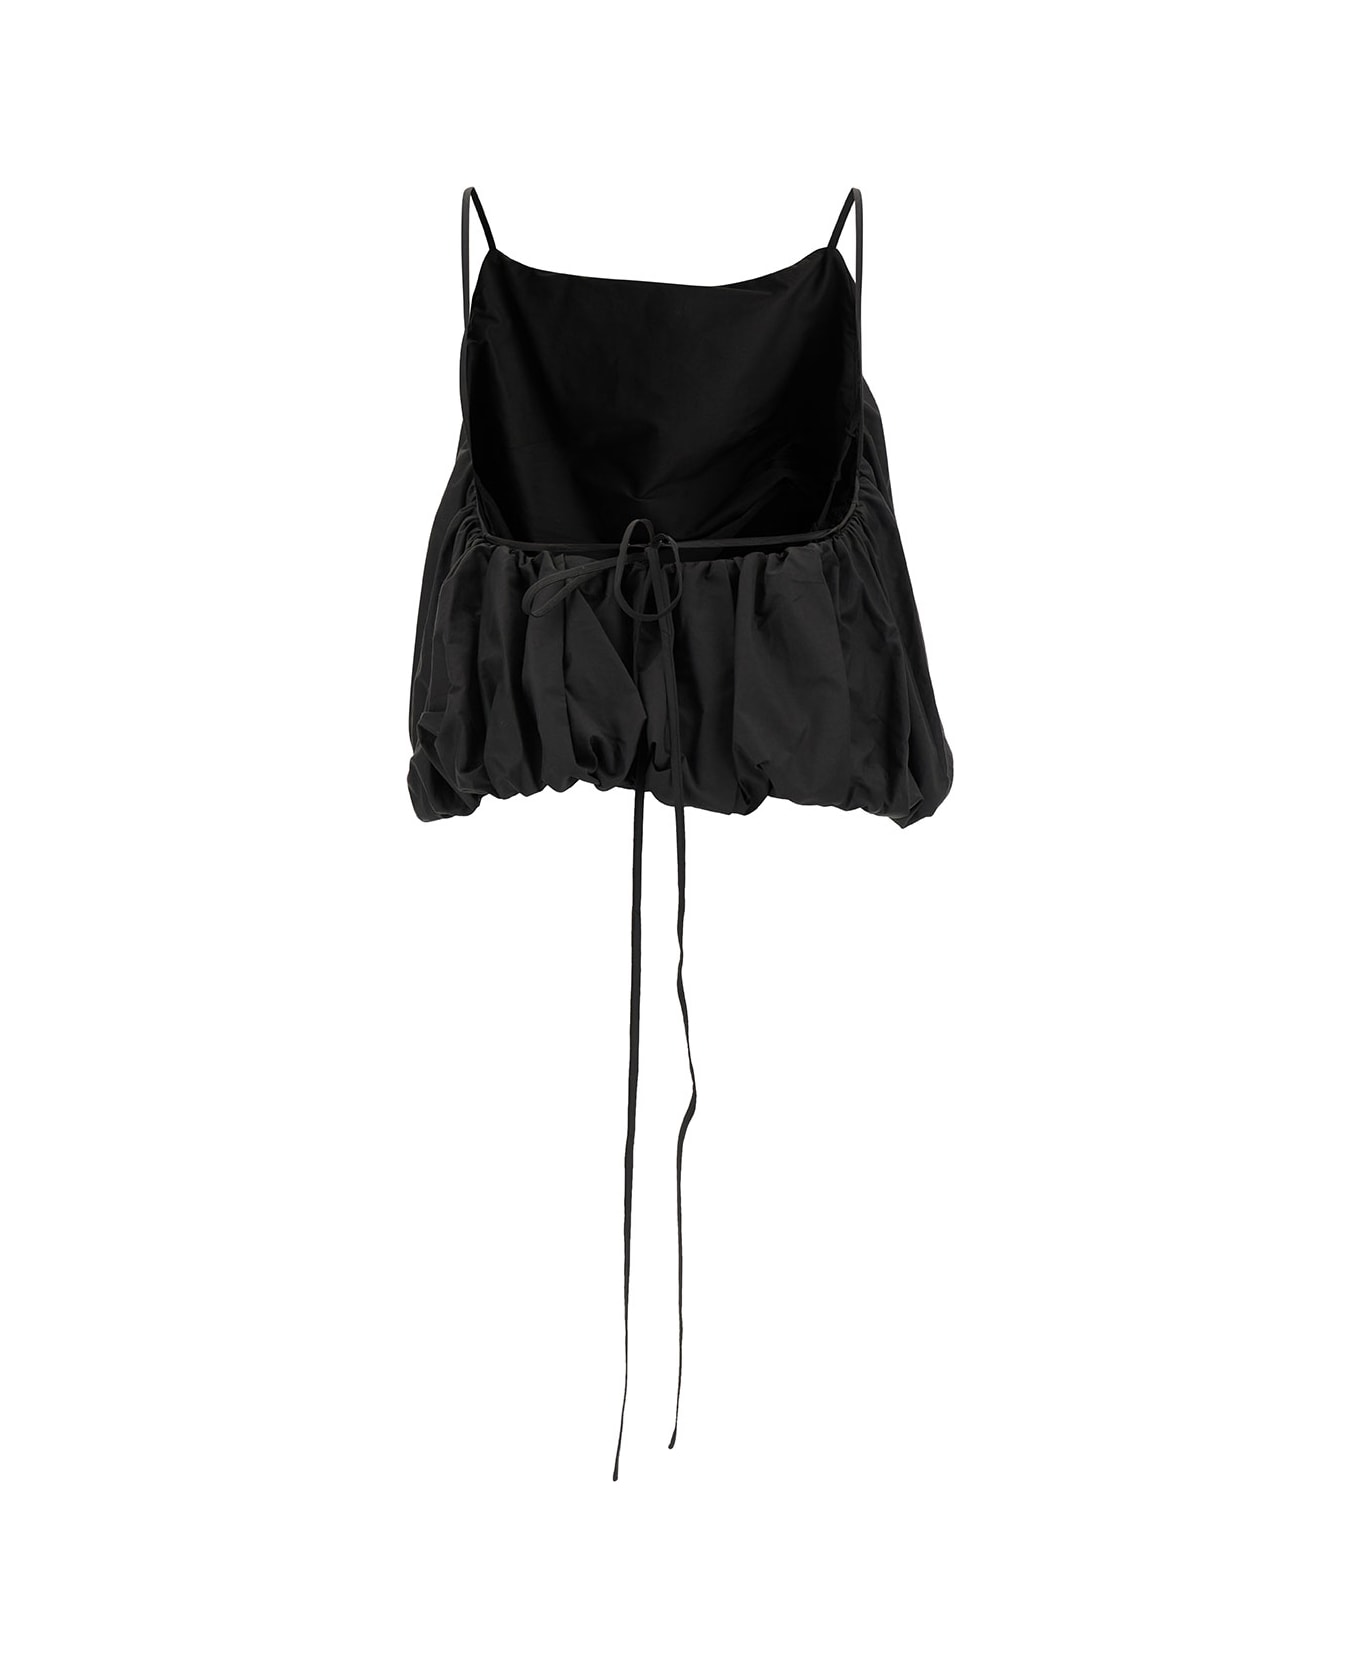 Low Classic Black Voluminous Top With Open Back In Cotton Blend Woman - Black